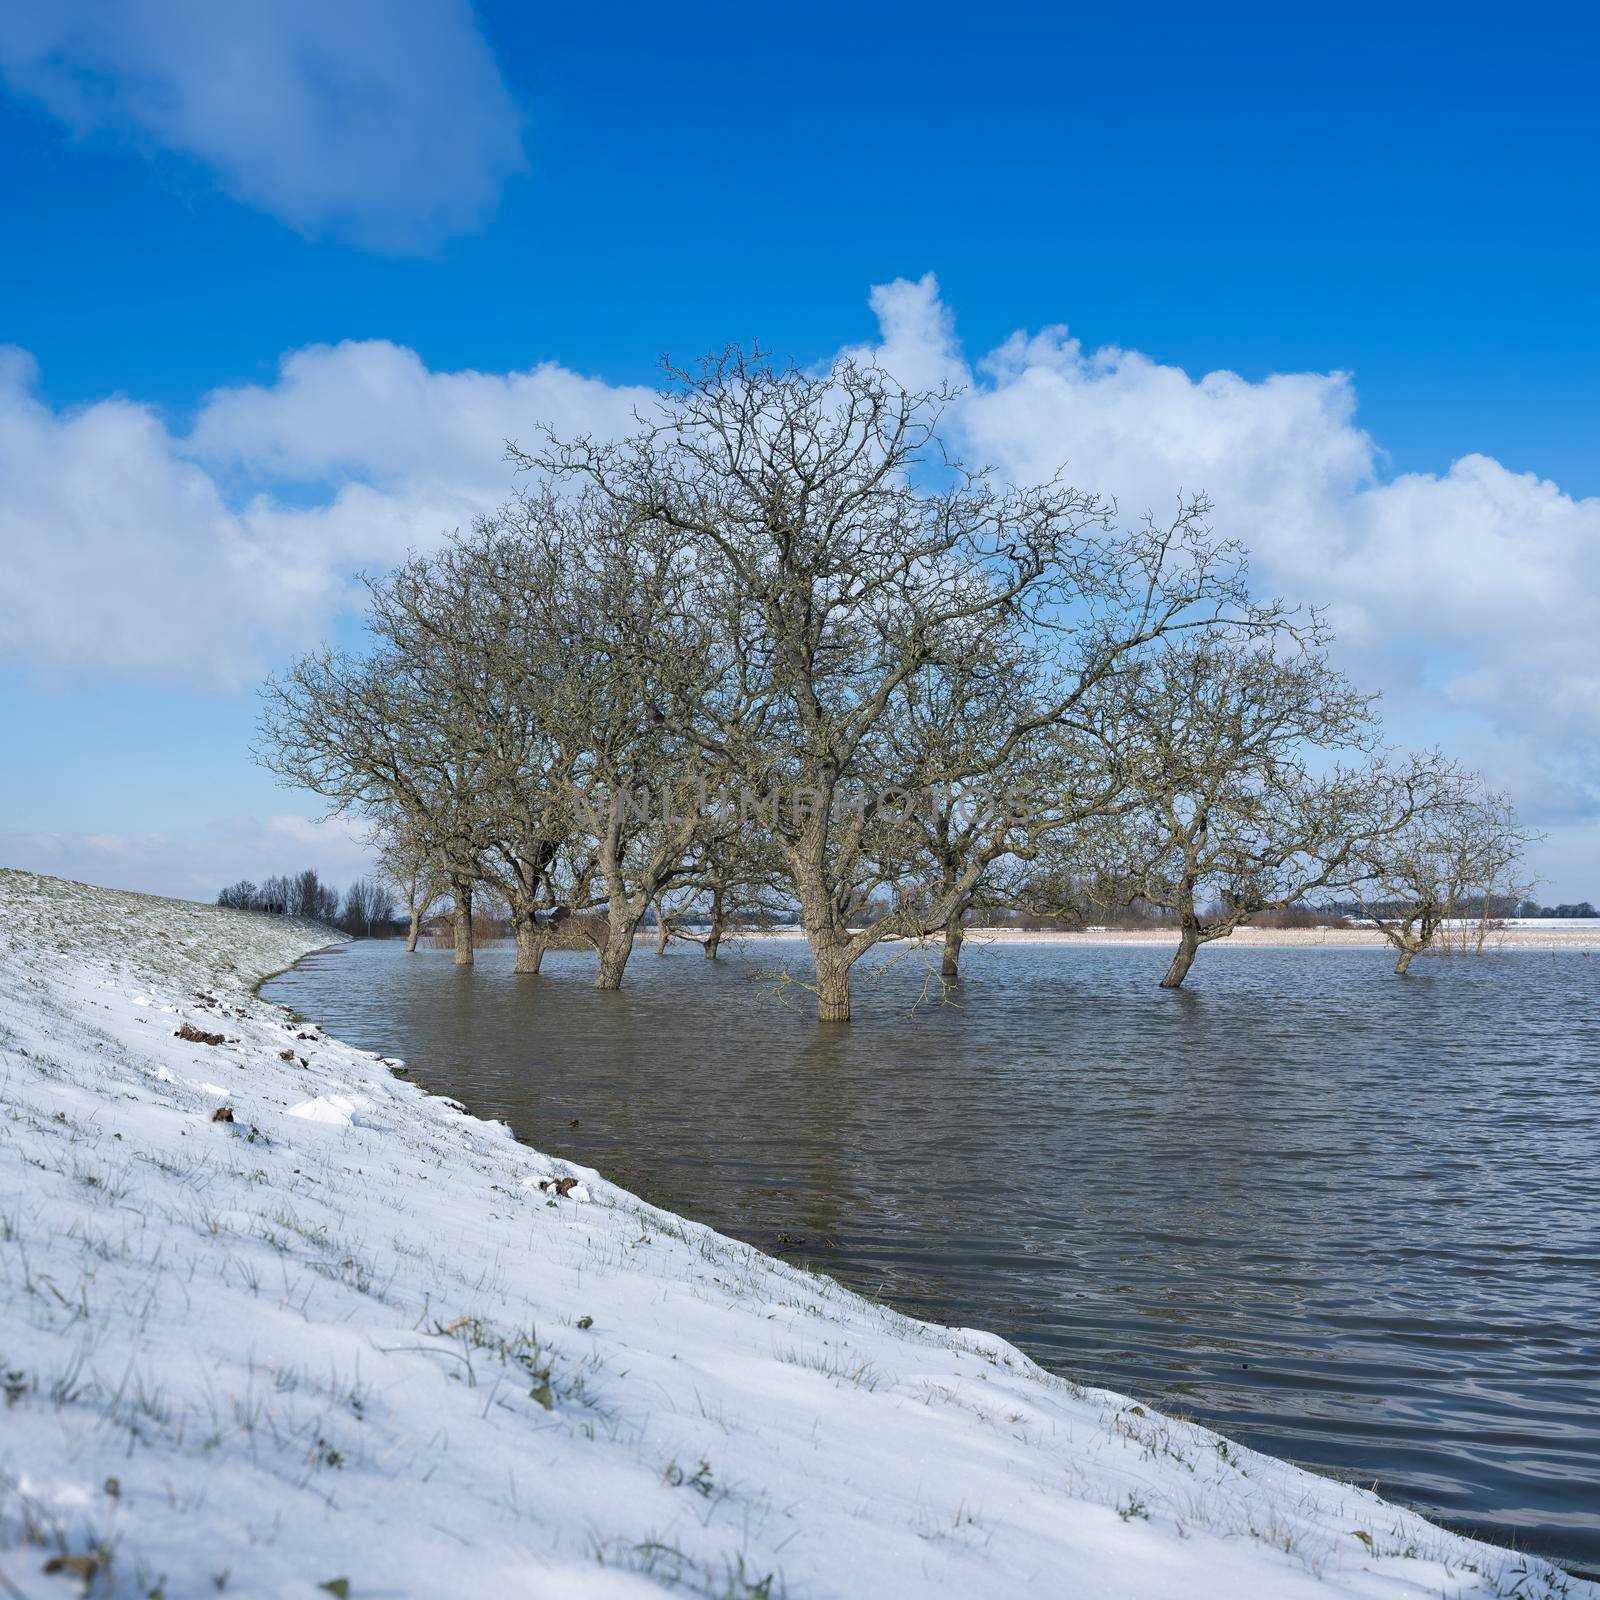 trees in water of floodplanes during flood of river rhine near culemborg in holland under blue sky next to snow covered dike